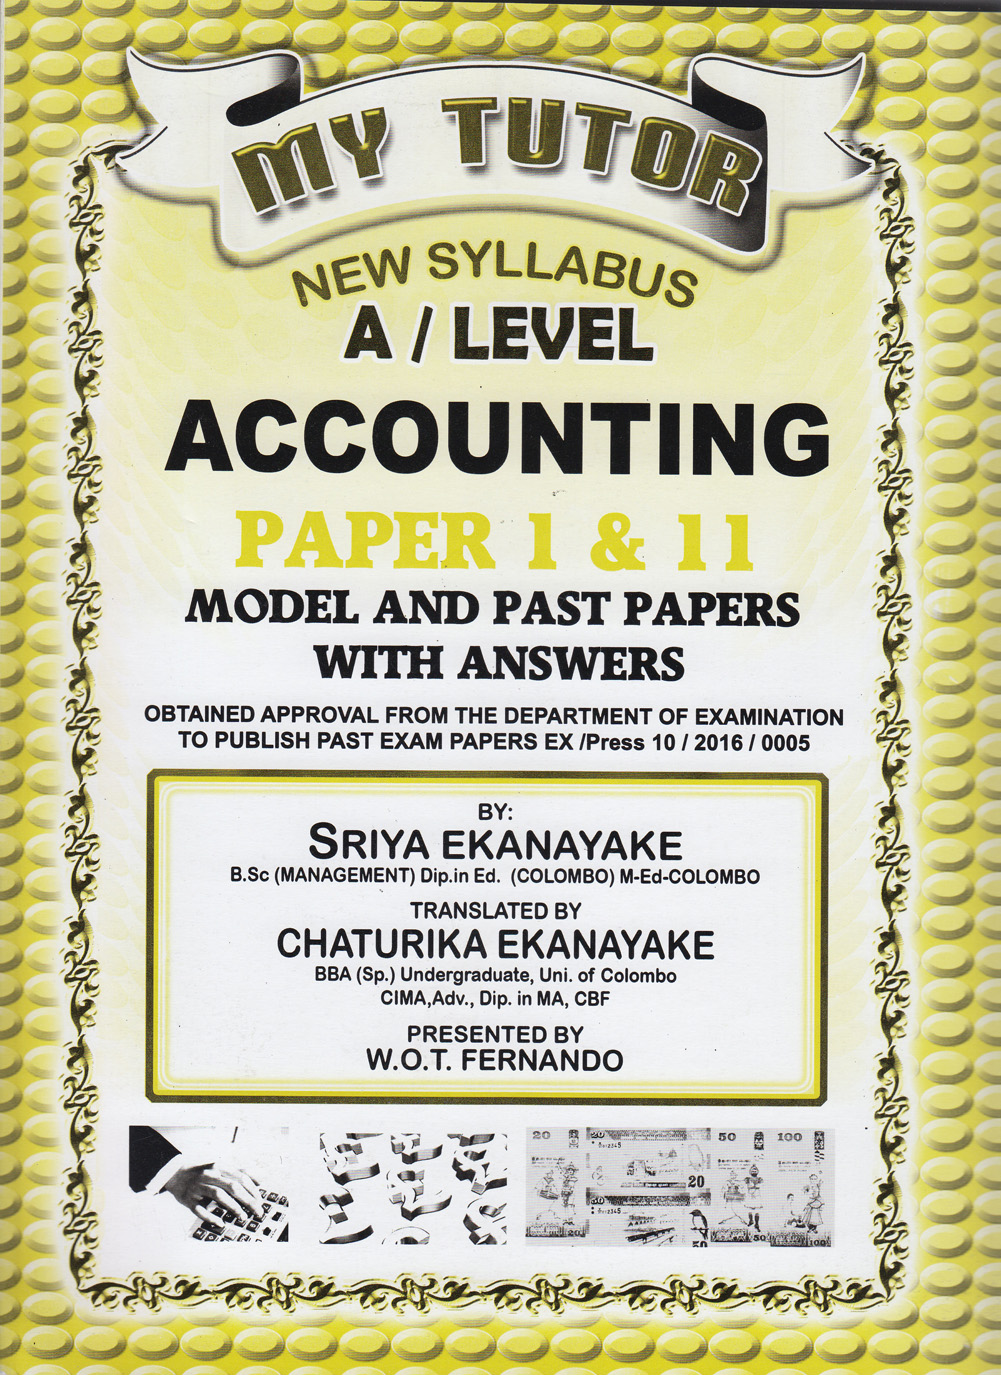 My Tutor A/L New Syllabus Accounting Paper 1 and 2 Model and Past Papers With Answers